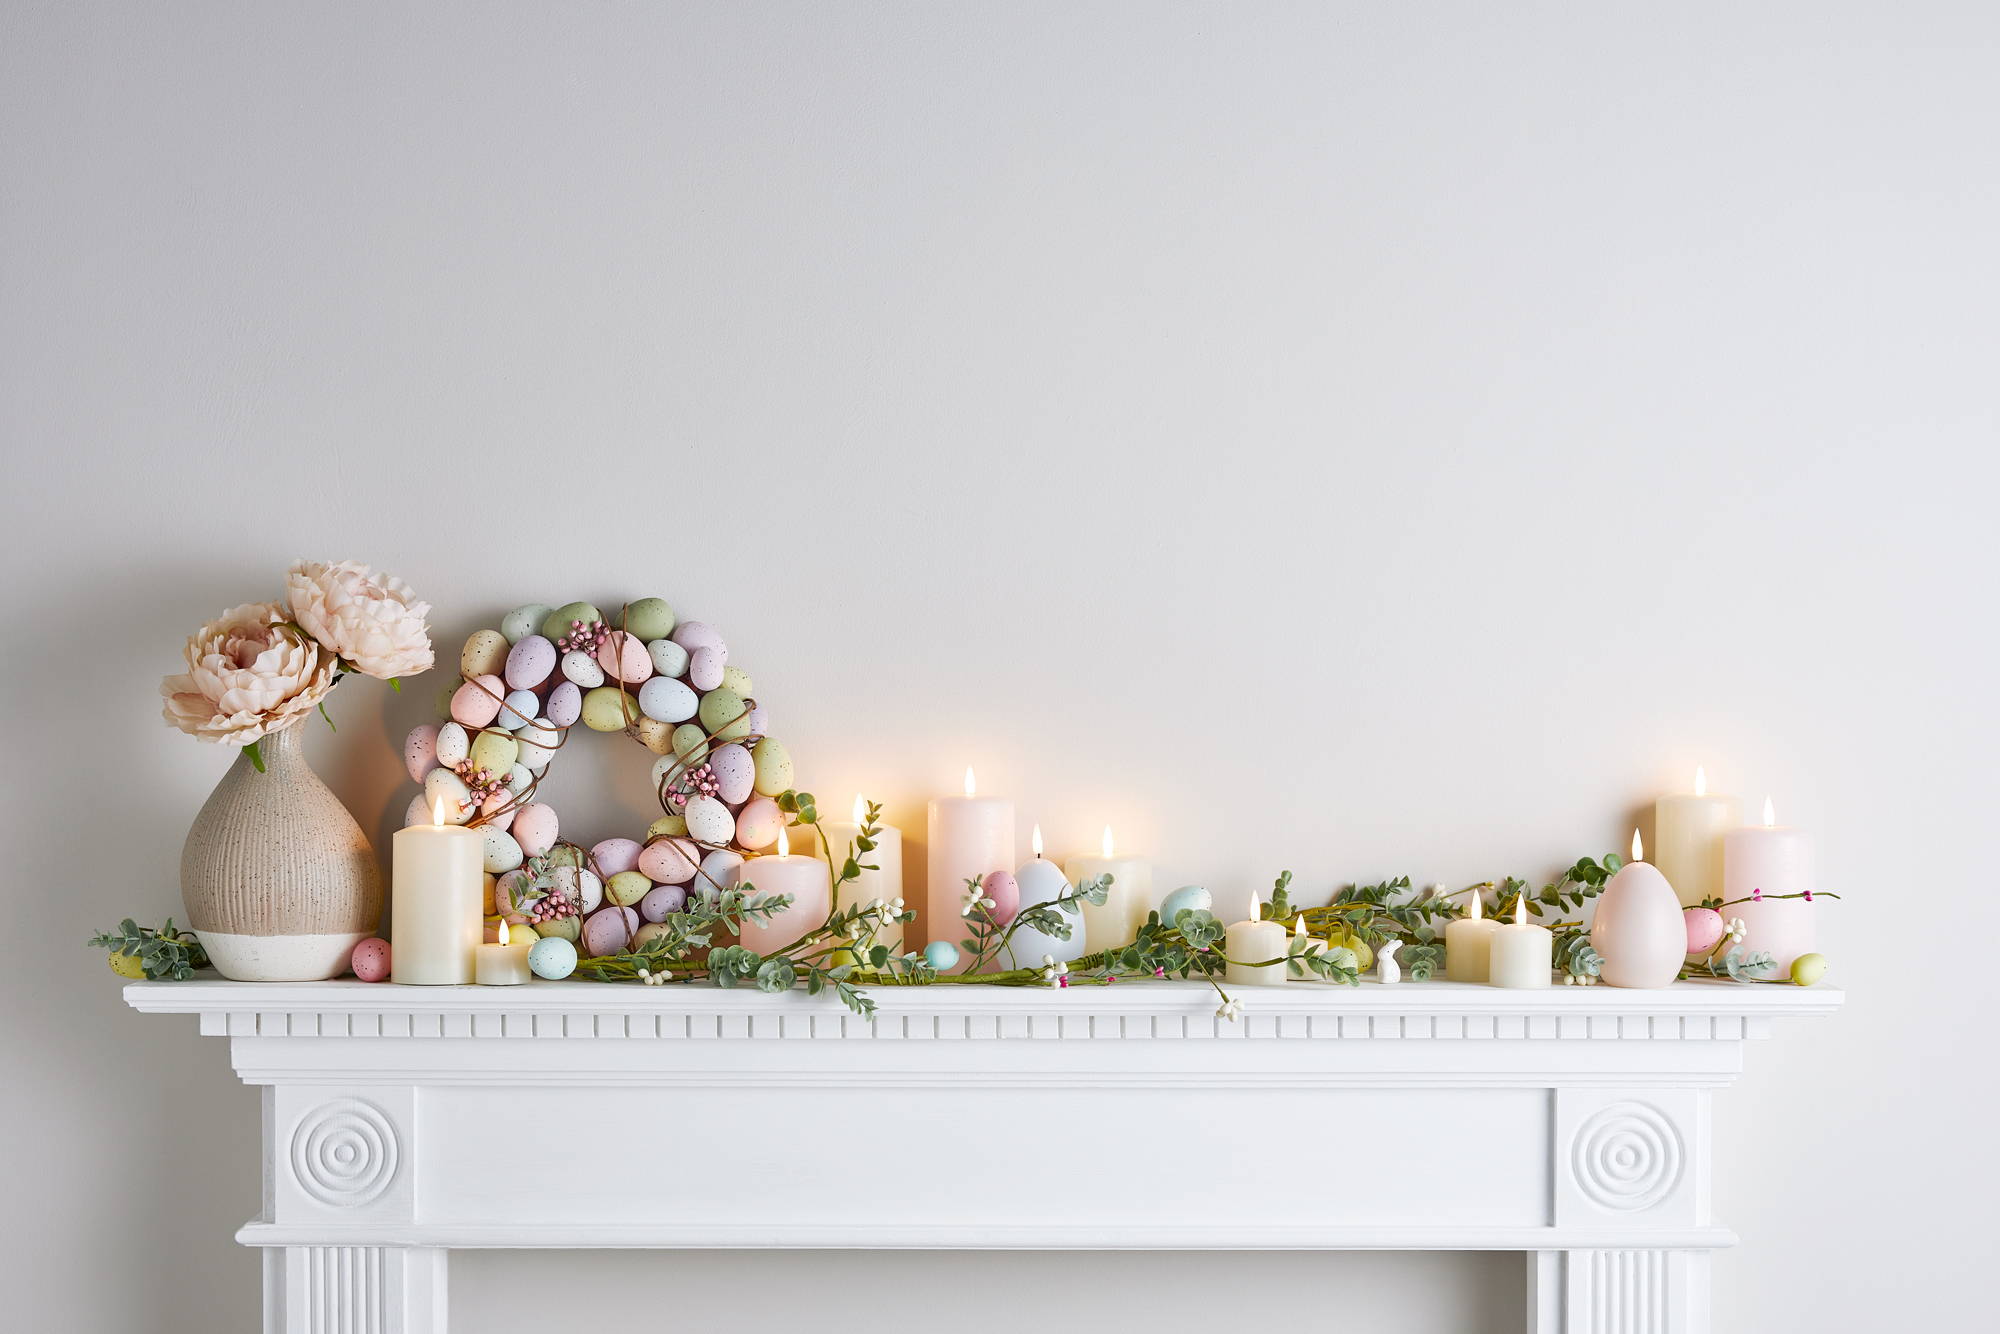 A white mantlepiece decorated with Easter wreaths, garland and pastel candles.